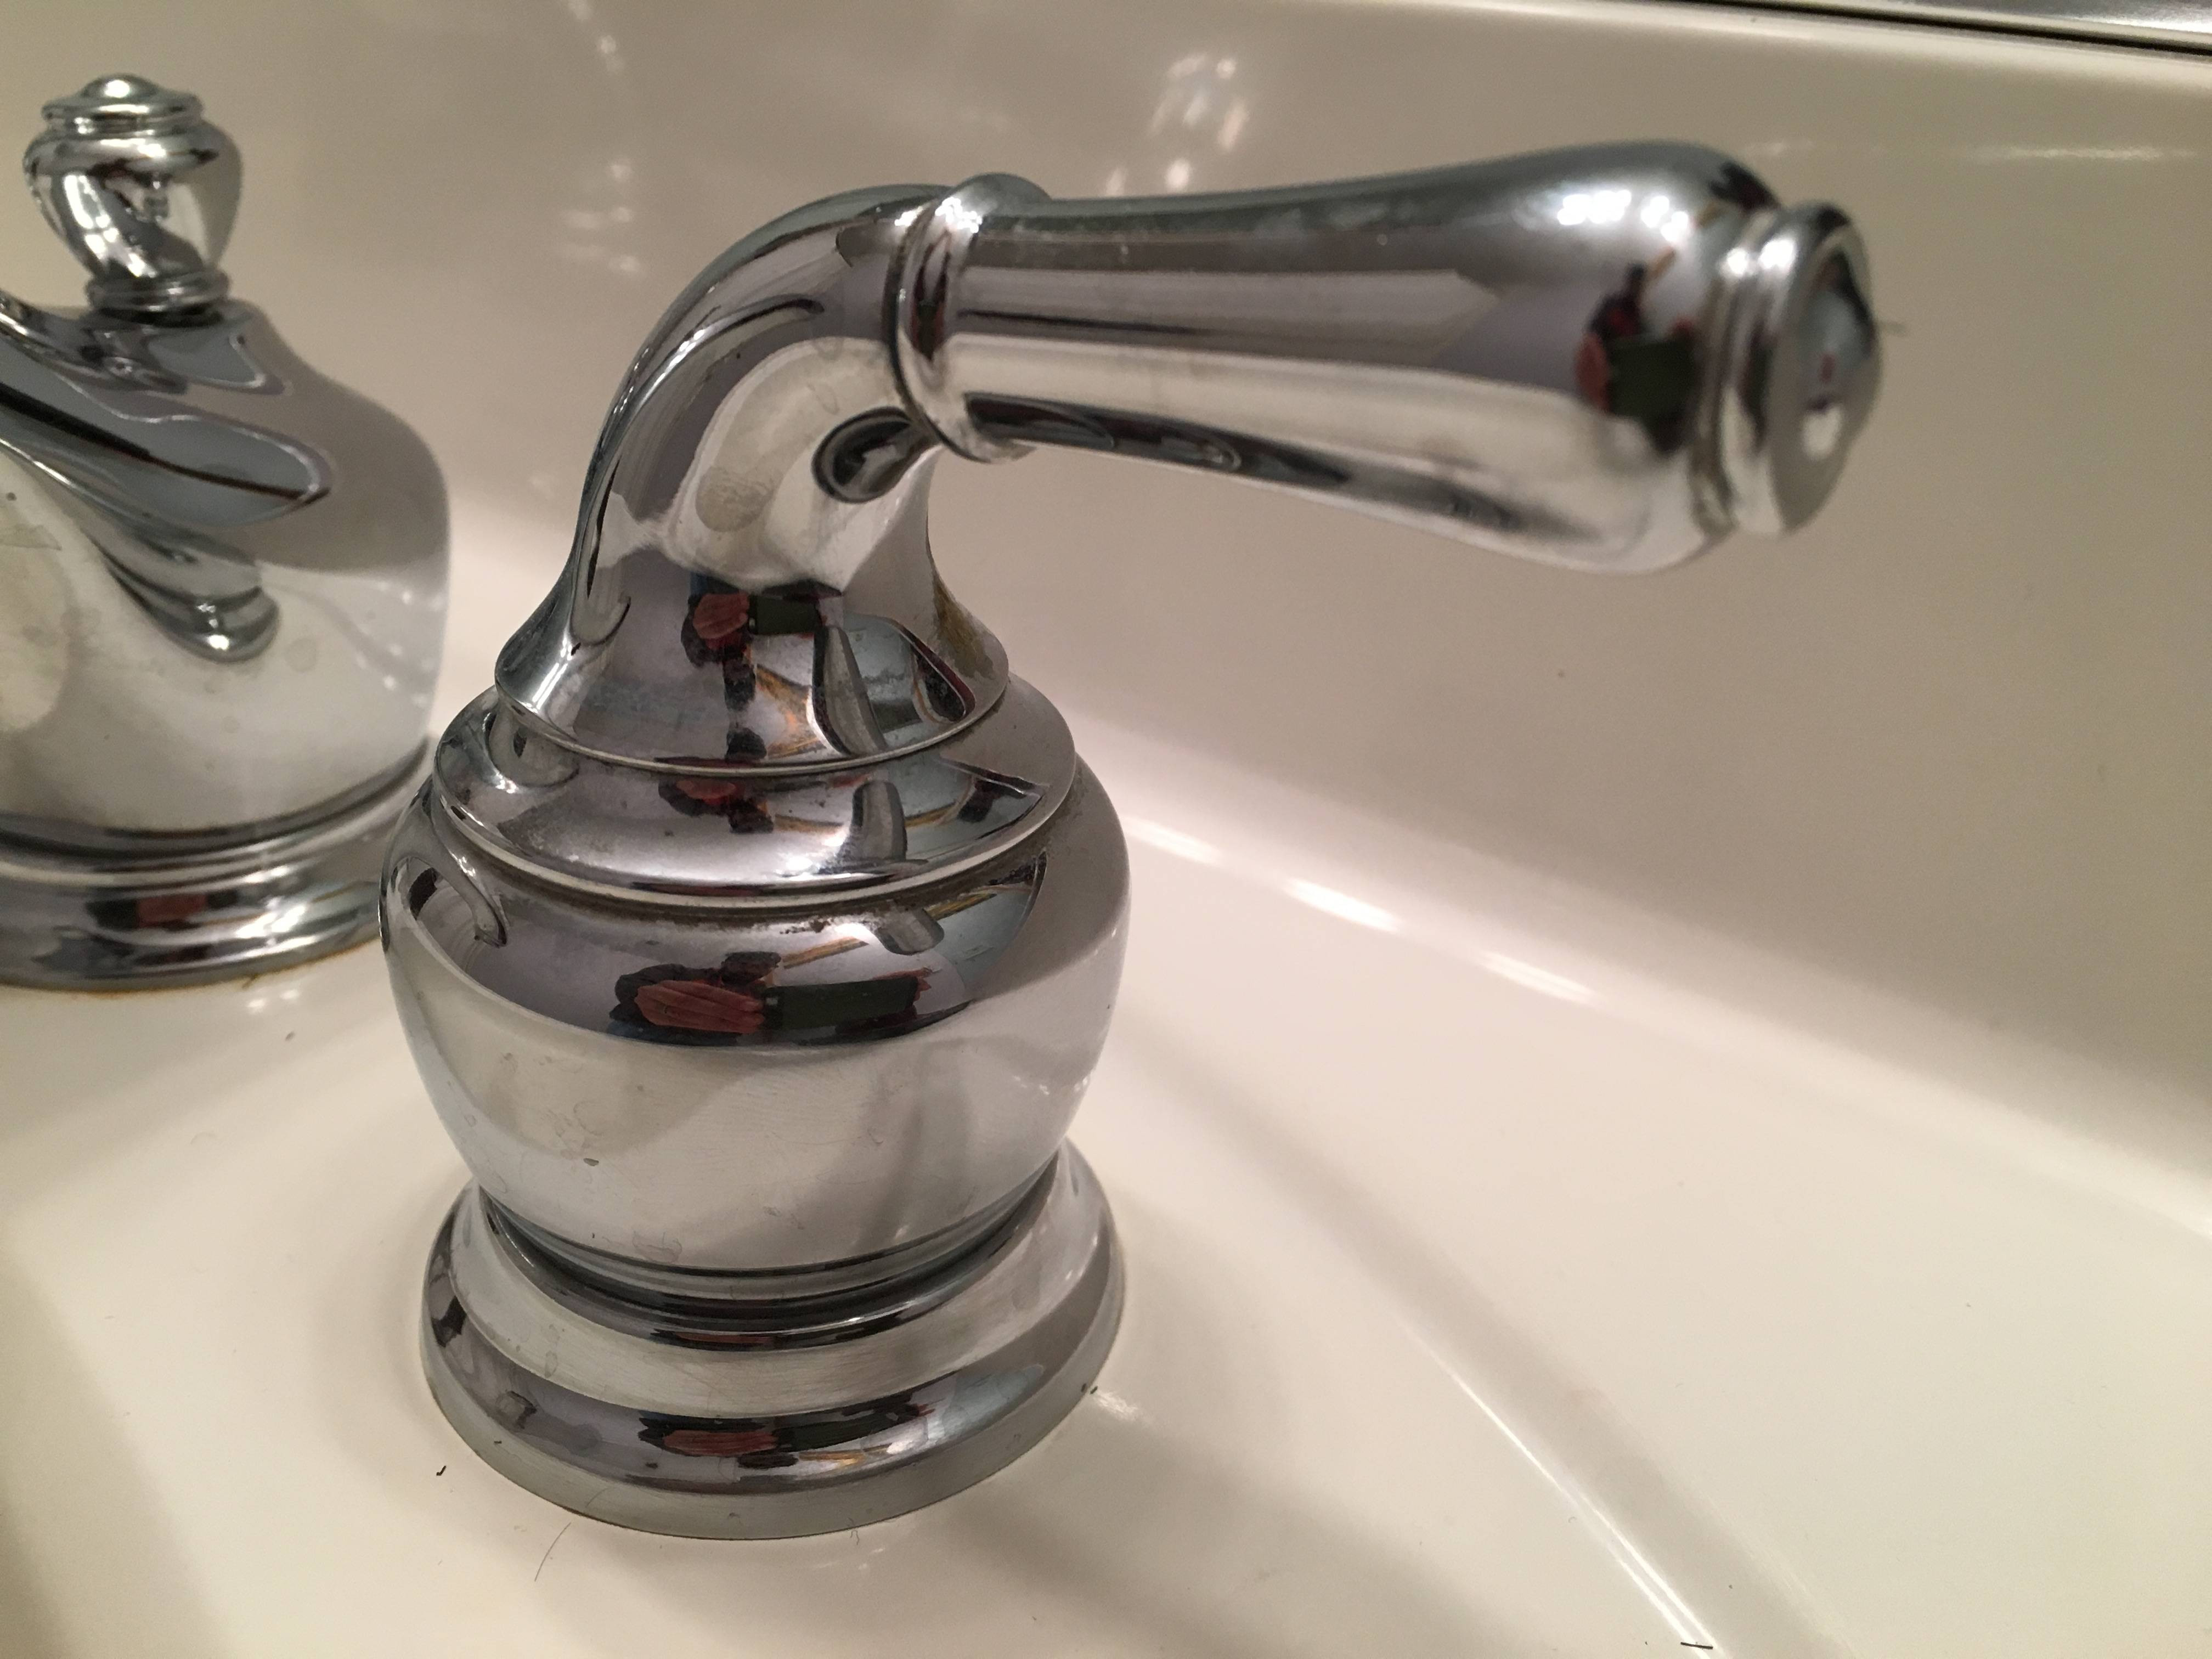 Fantastic Faucet Turned Off But Water Still Running Adornment Sink Pertaining To Sizing 4032 X 3024 